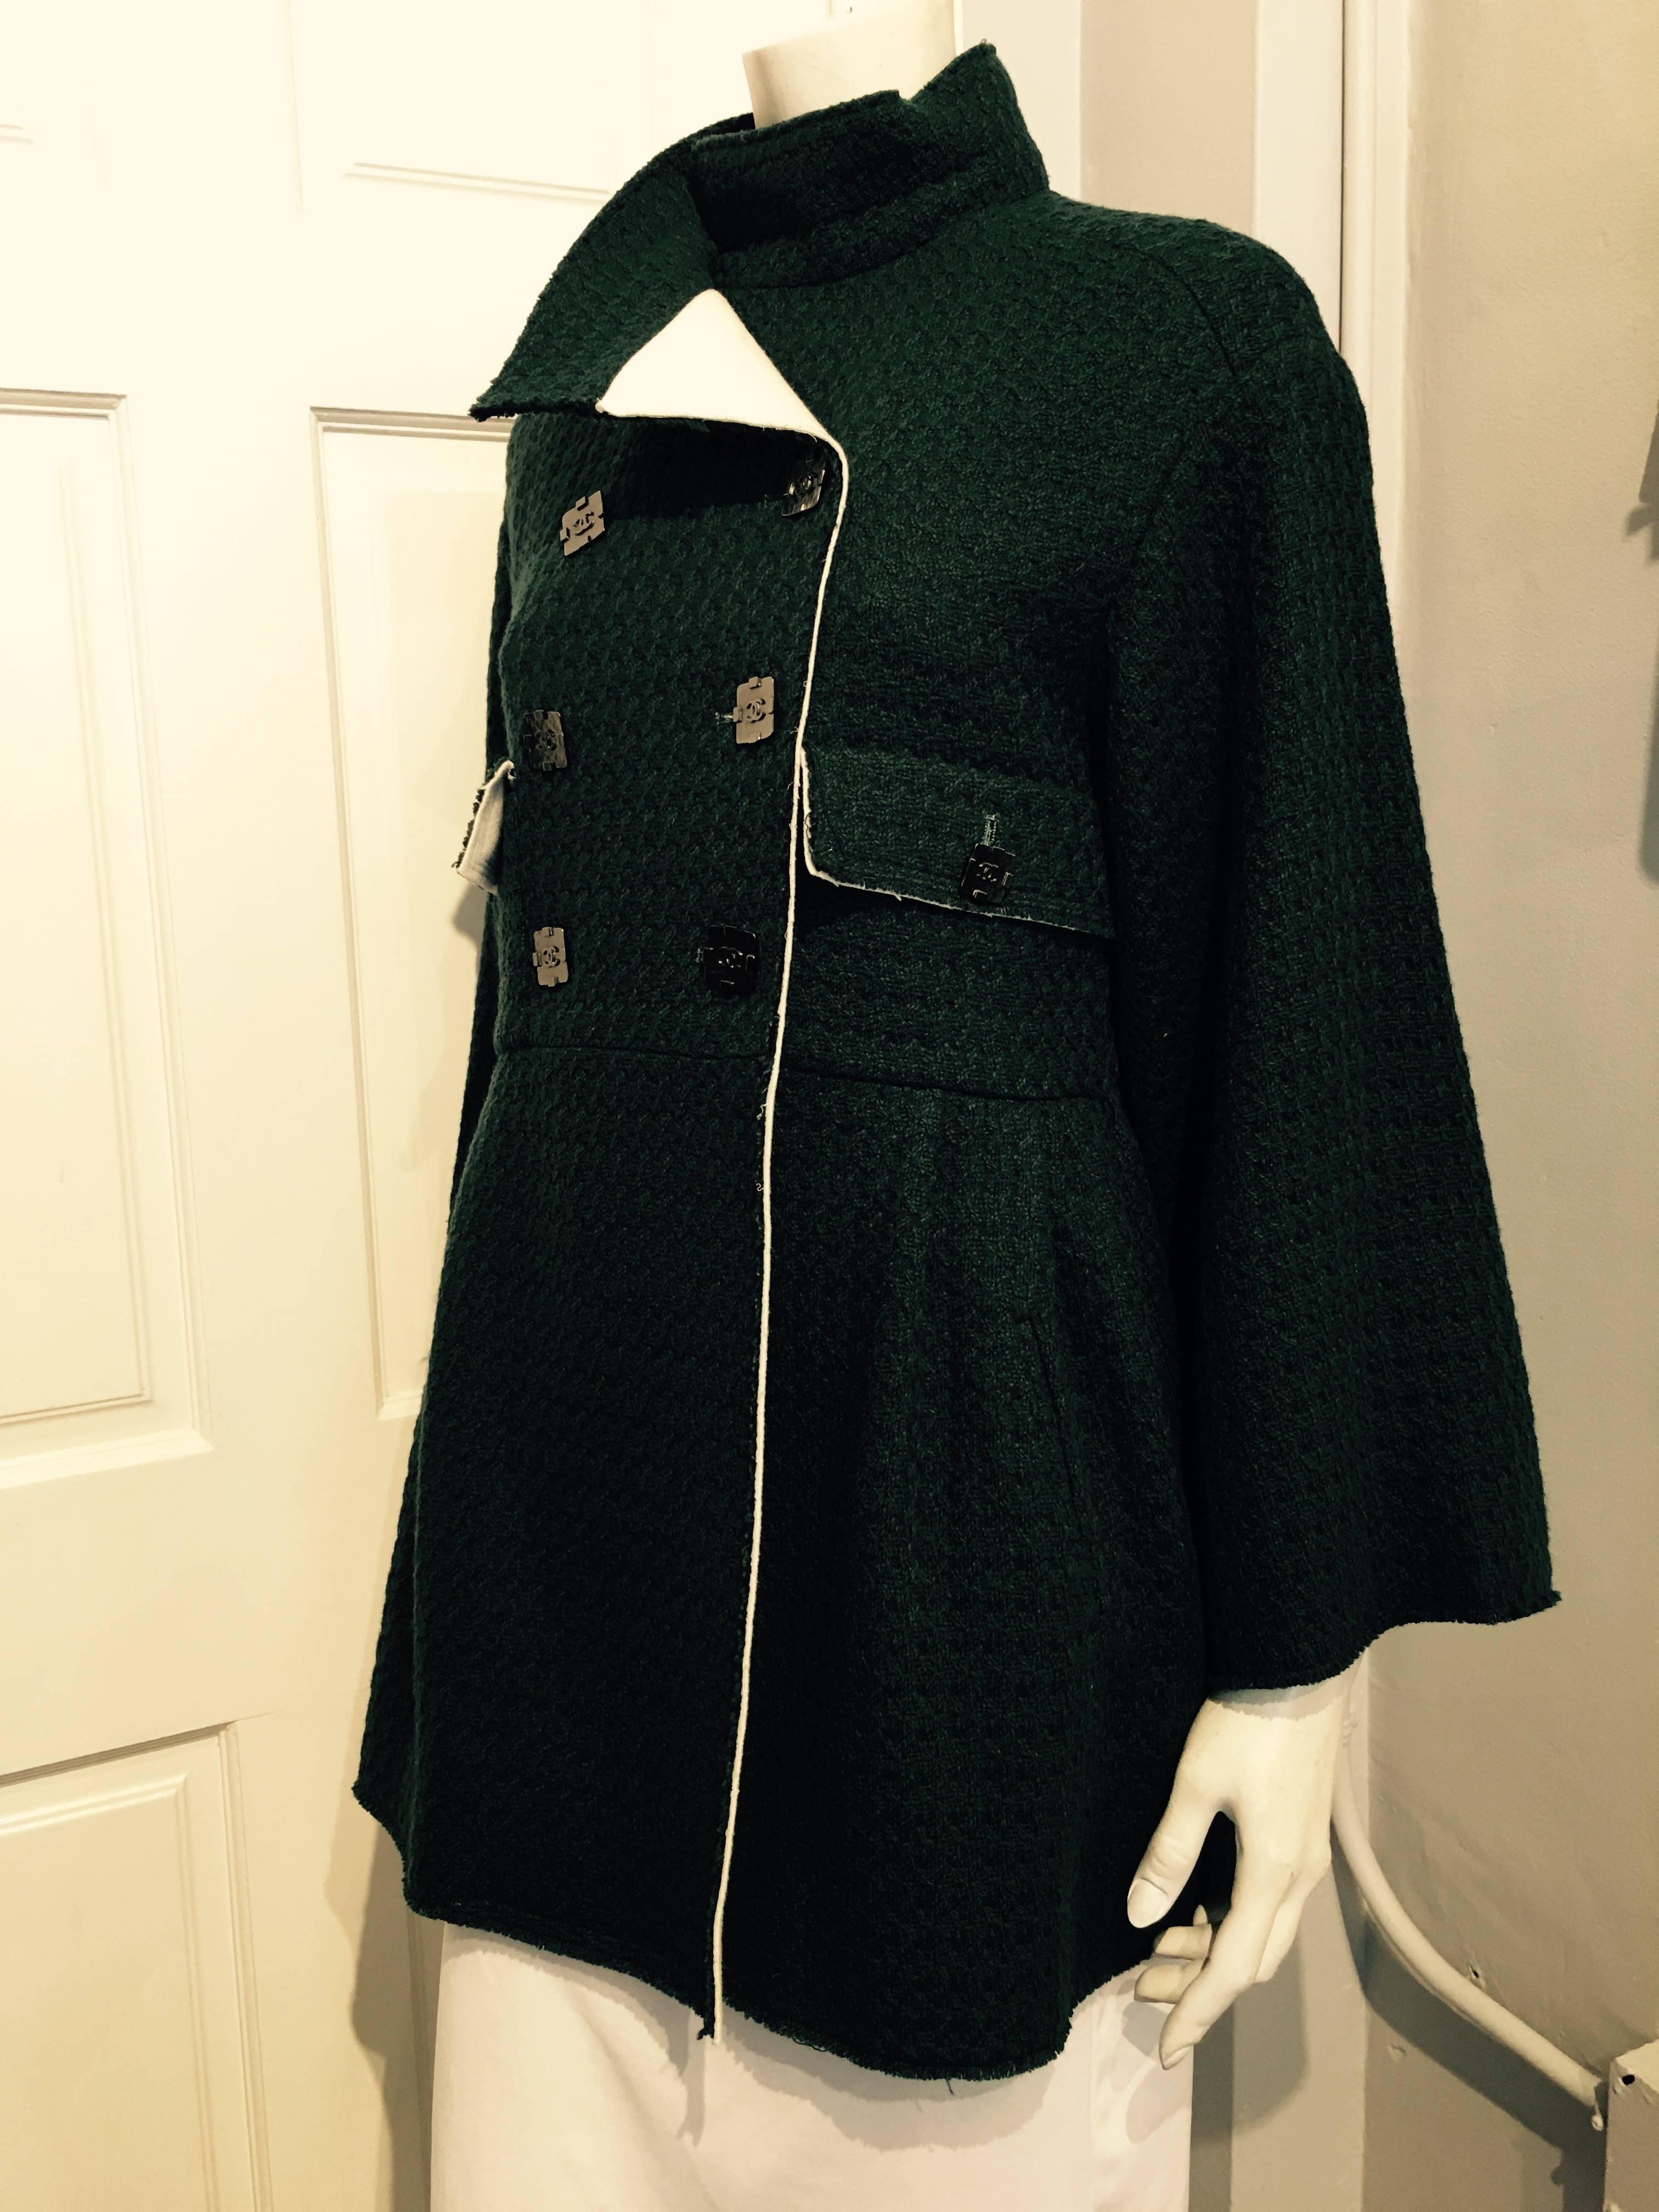 Chanel 3/4 length green tweed jacket in a houndstooth weave. The garment closes with a double row of square gunmetal color buttons with iconic CC and with two more smaller buttons on the flaps of two pockets at the waist. The skirt of the jacket has